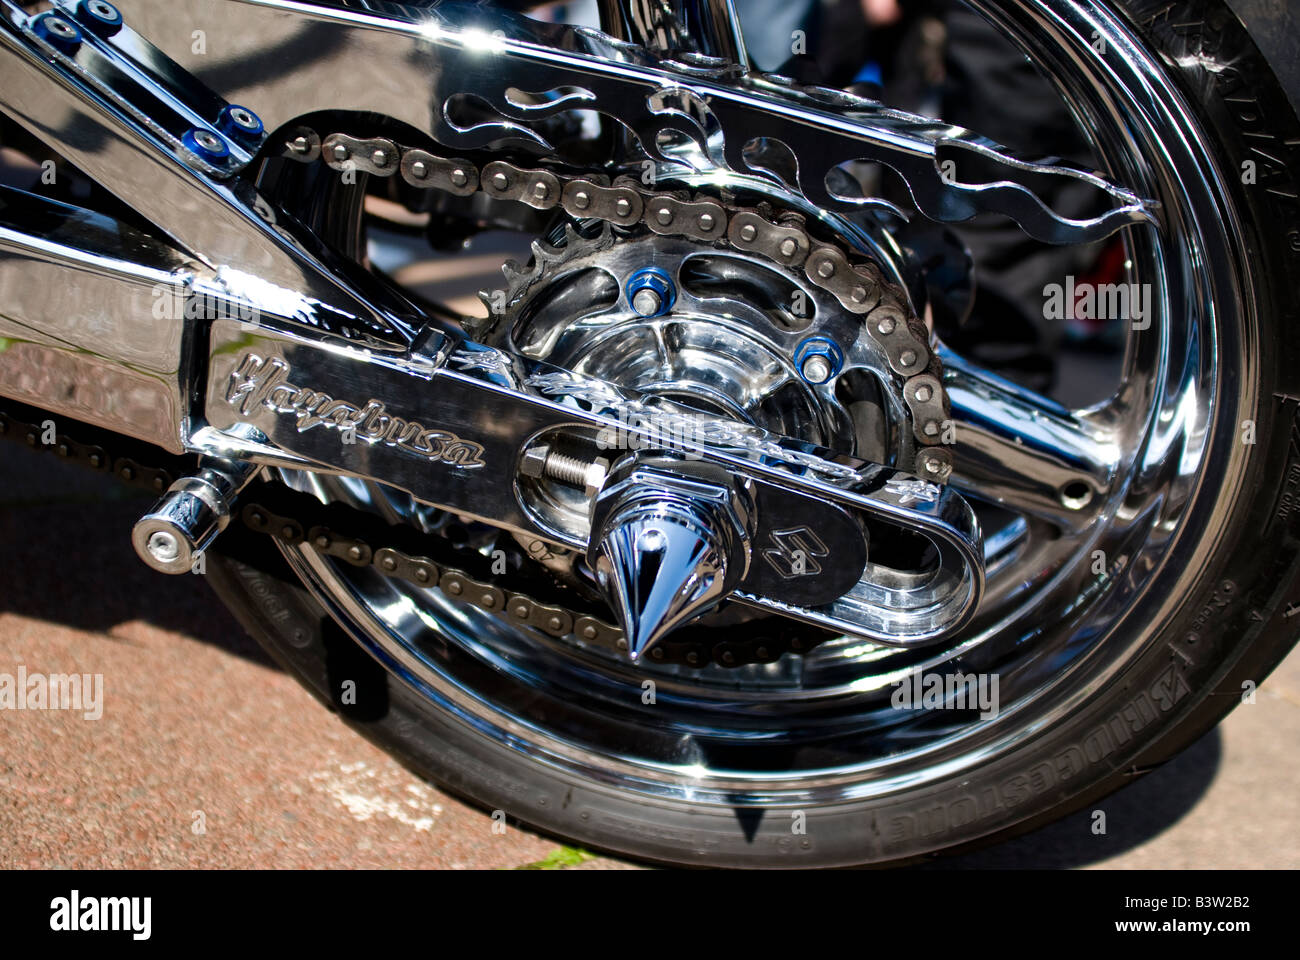 Rear wheel of a motorcycle with chrome work and chain Stock Photo